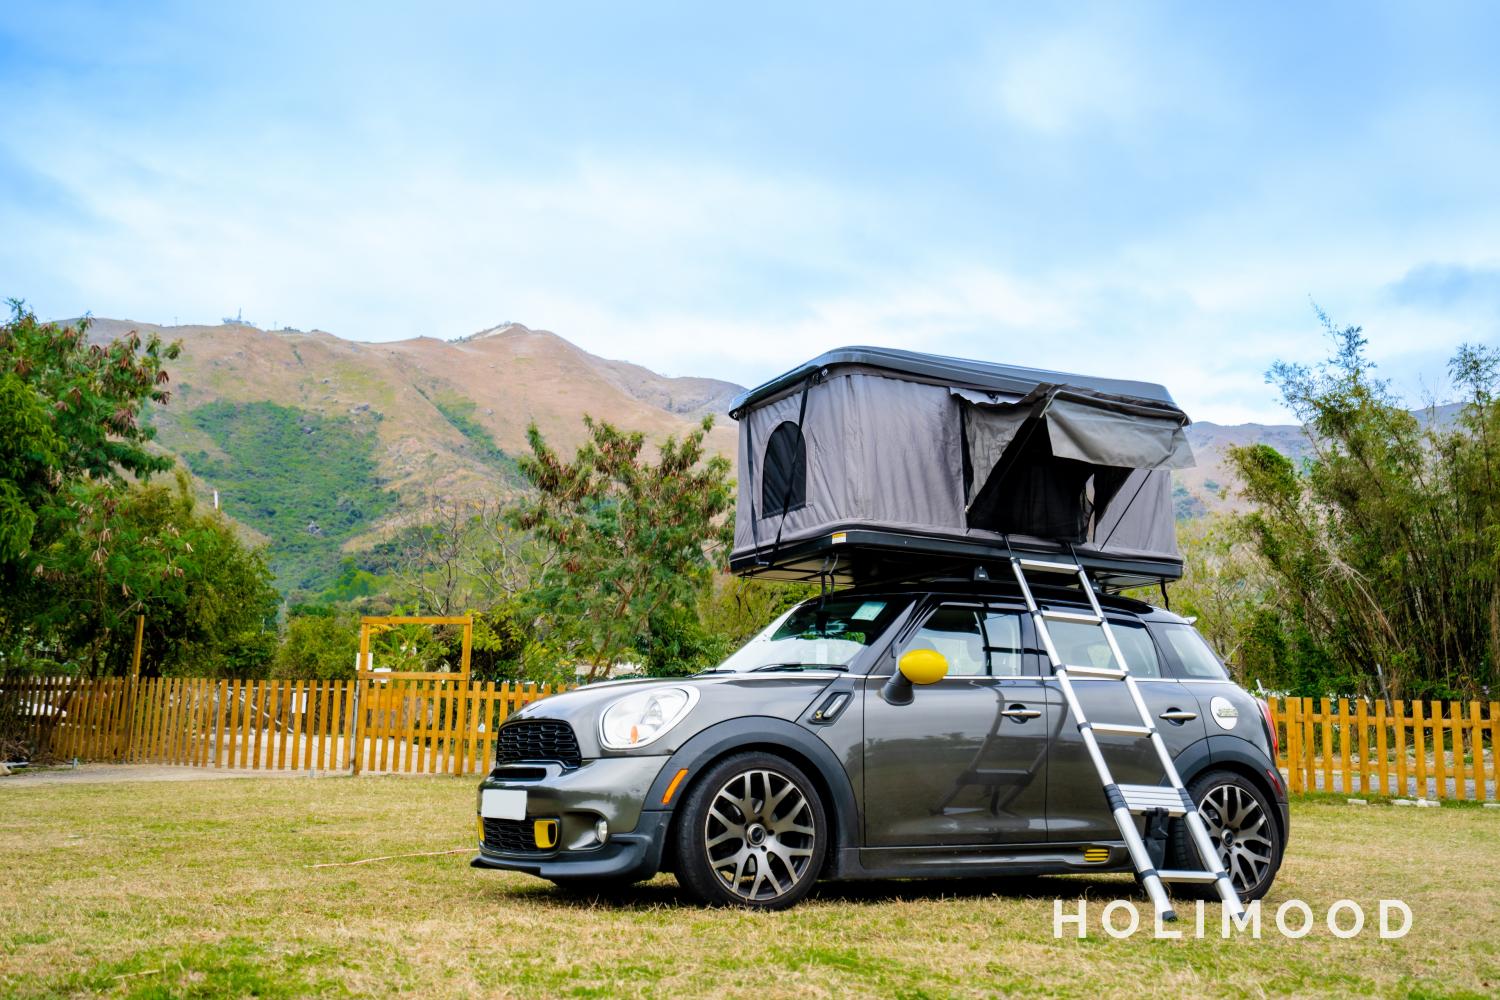 DNA 租車 【Girl Dream Car】Mini Cooper Countryman Roof Camping and Car Camping Experience 12